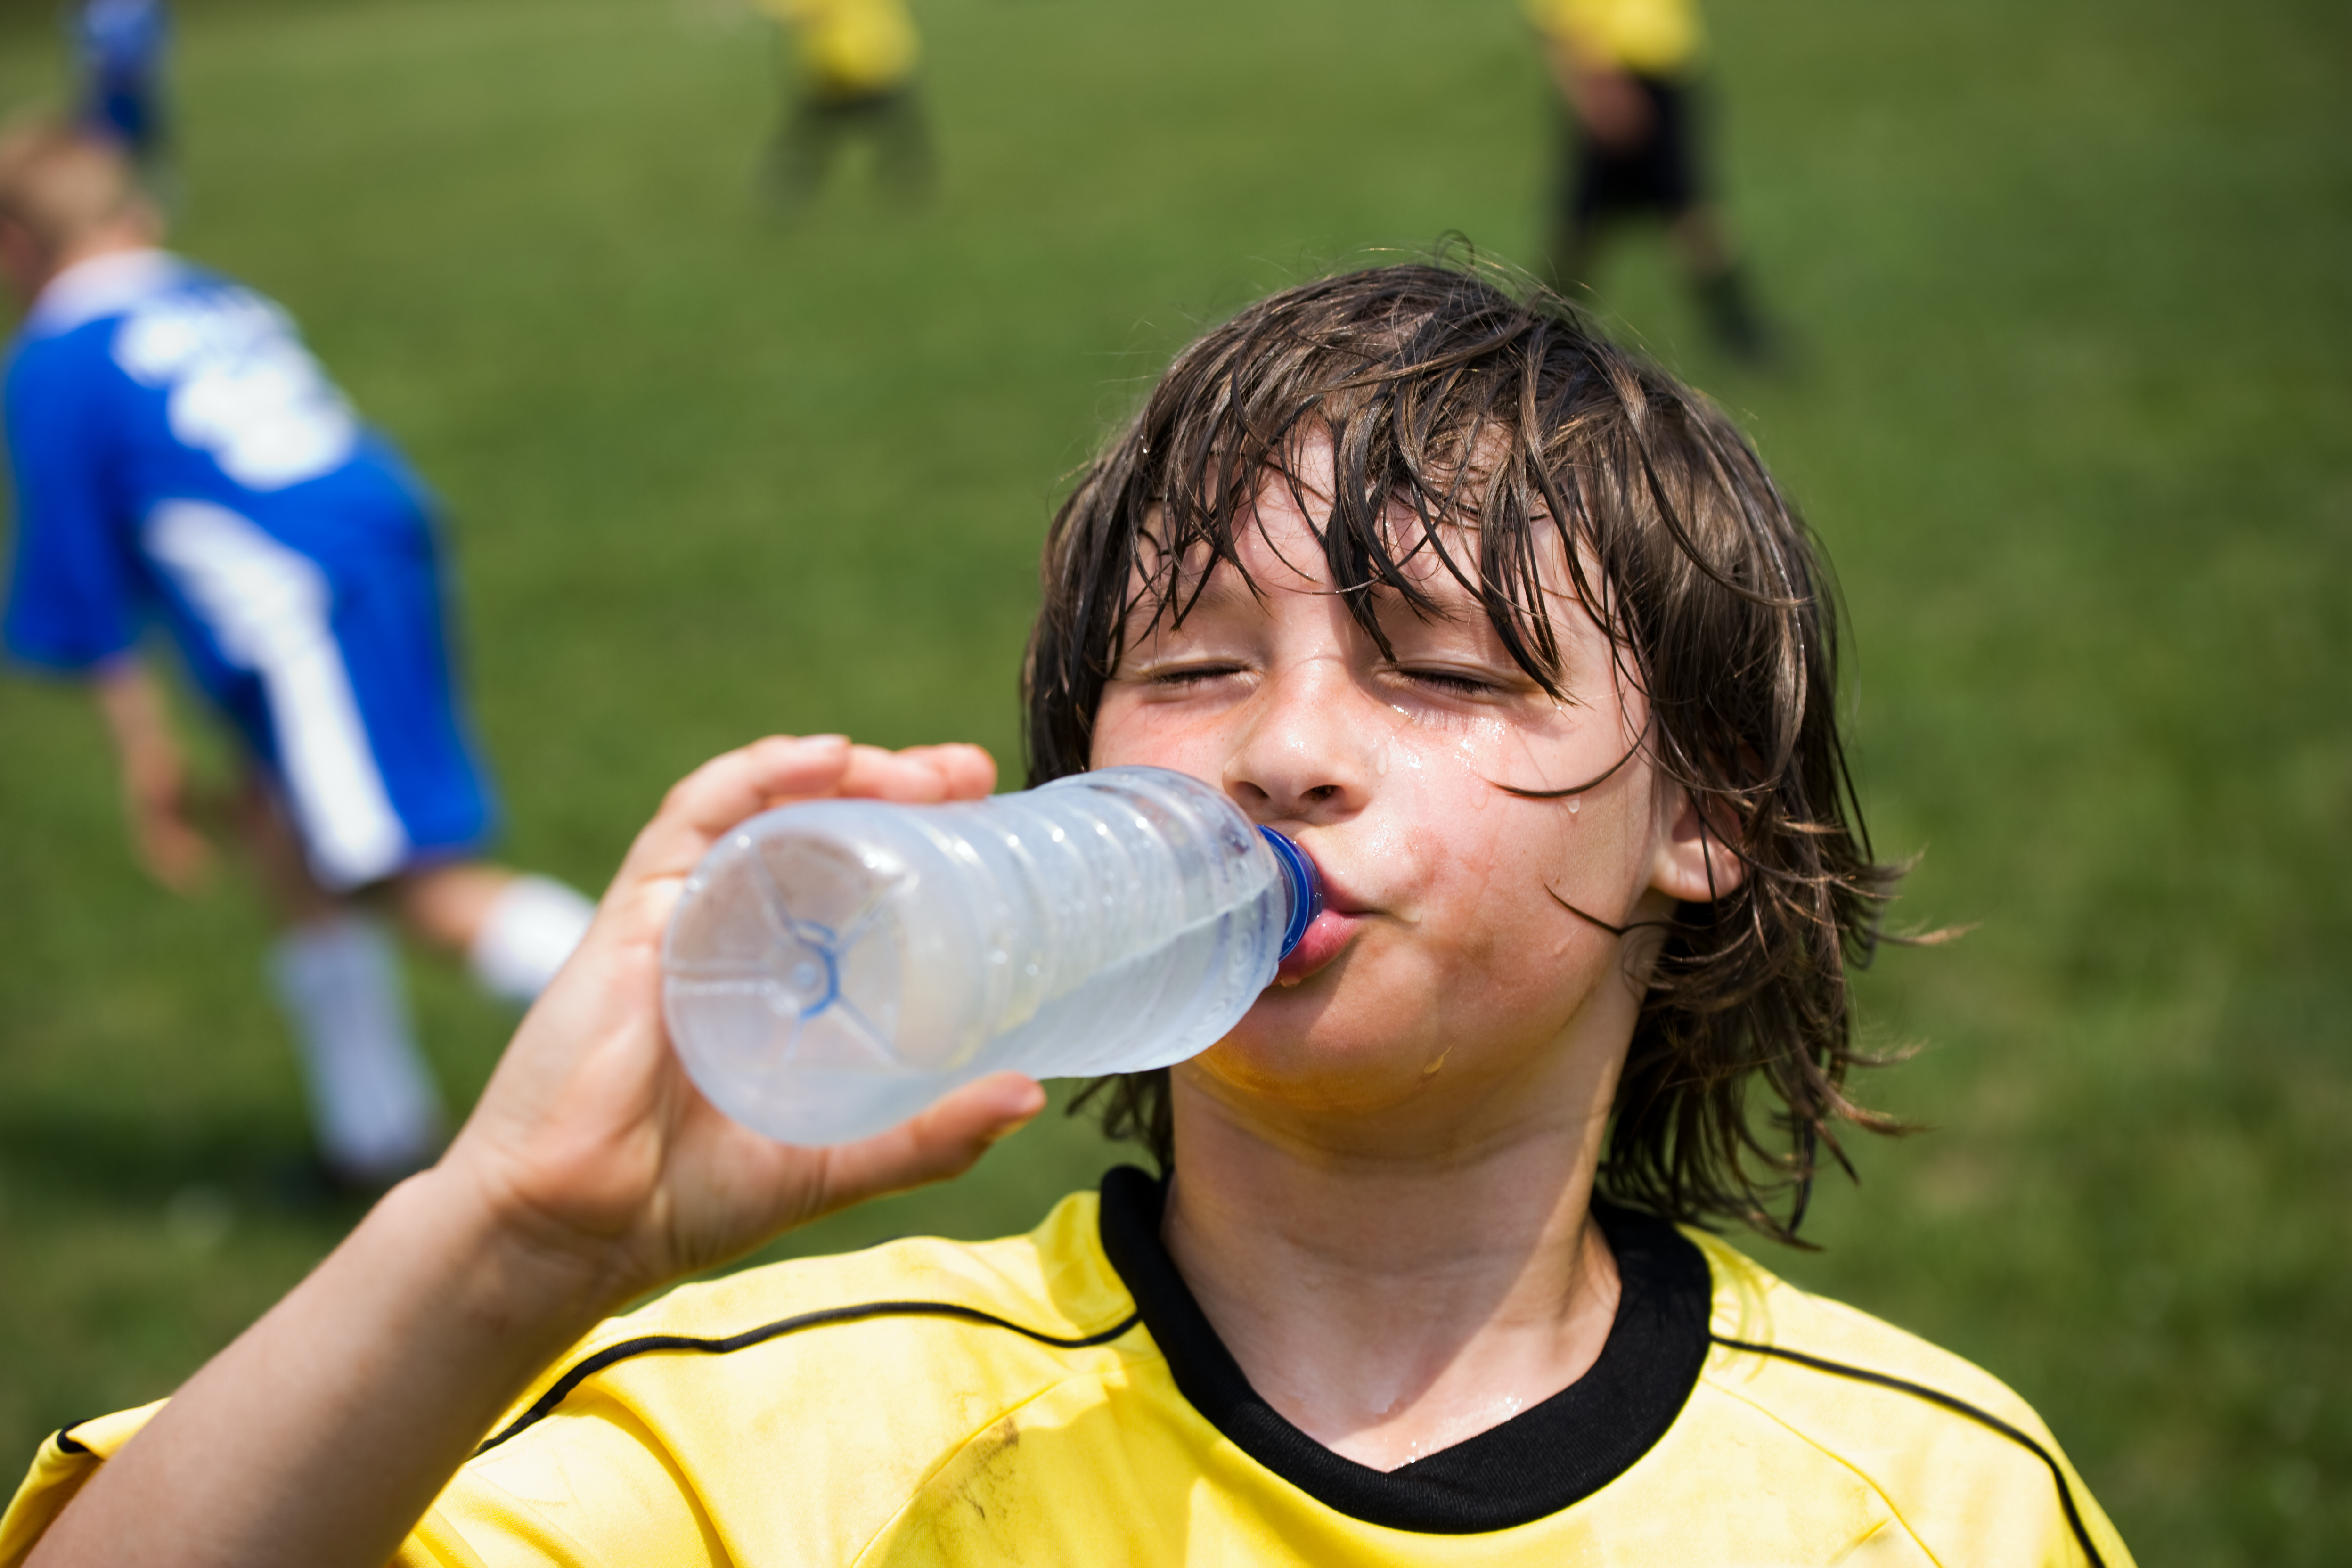 Ask the Doc: Heat Stroke vs. Heat Exhaustion -- What's the Difference?